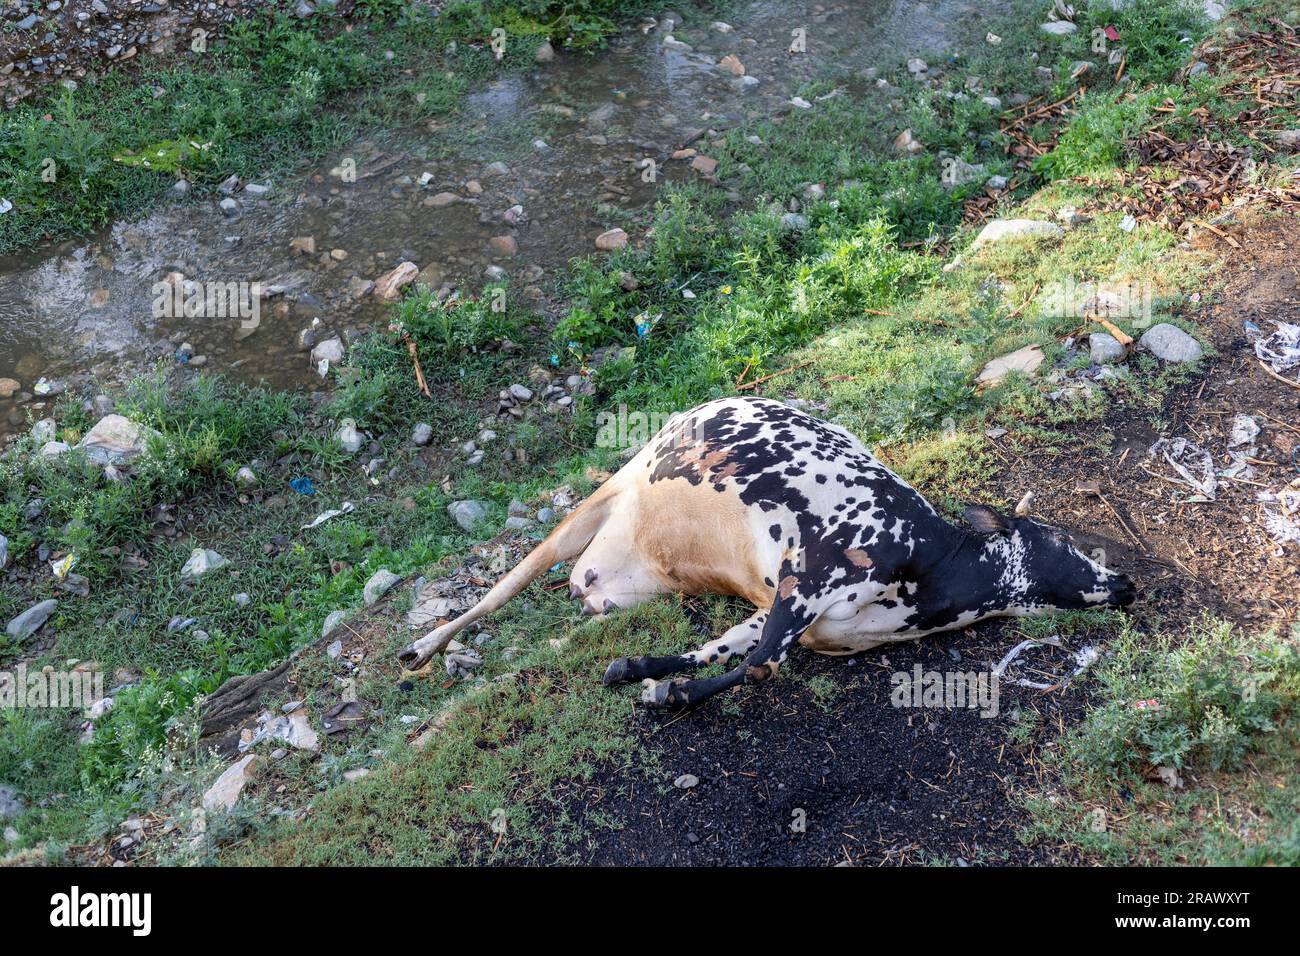 Dead cow lying on the ground near a water stream Stock Photo